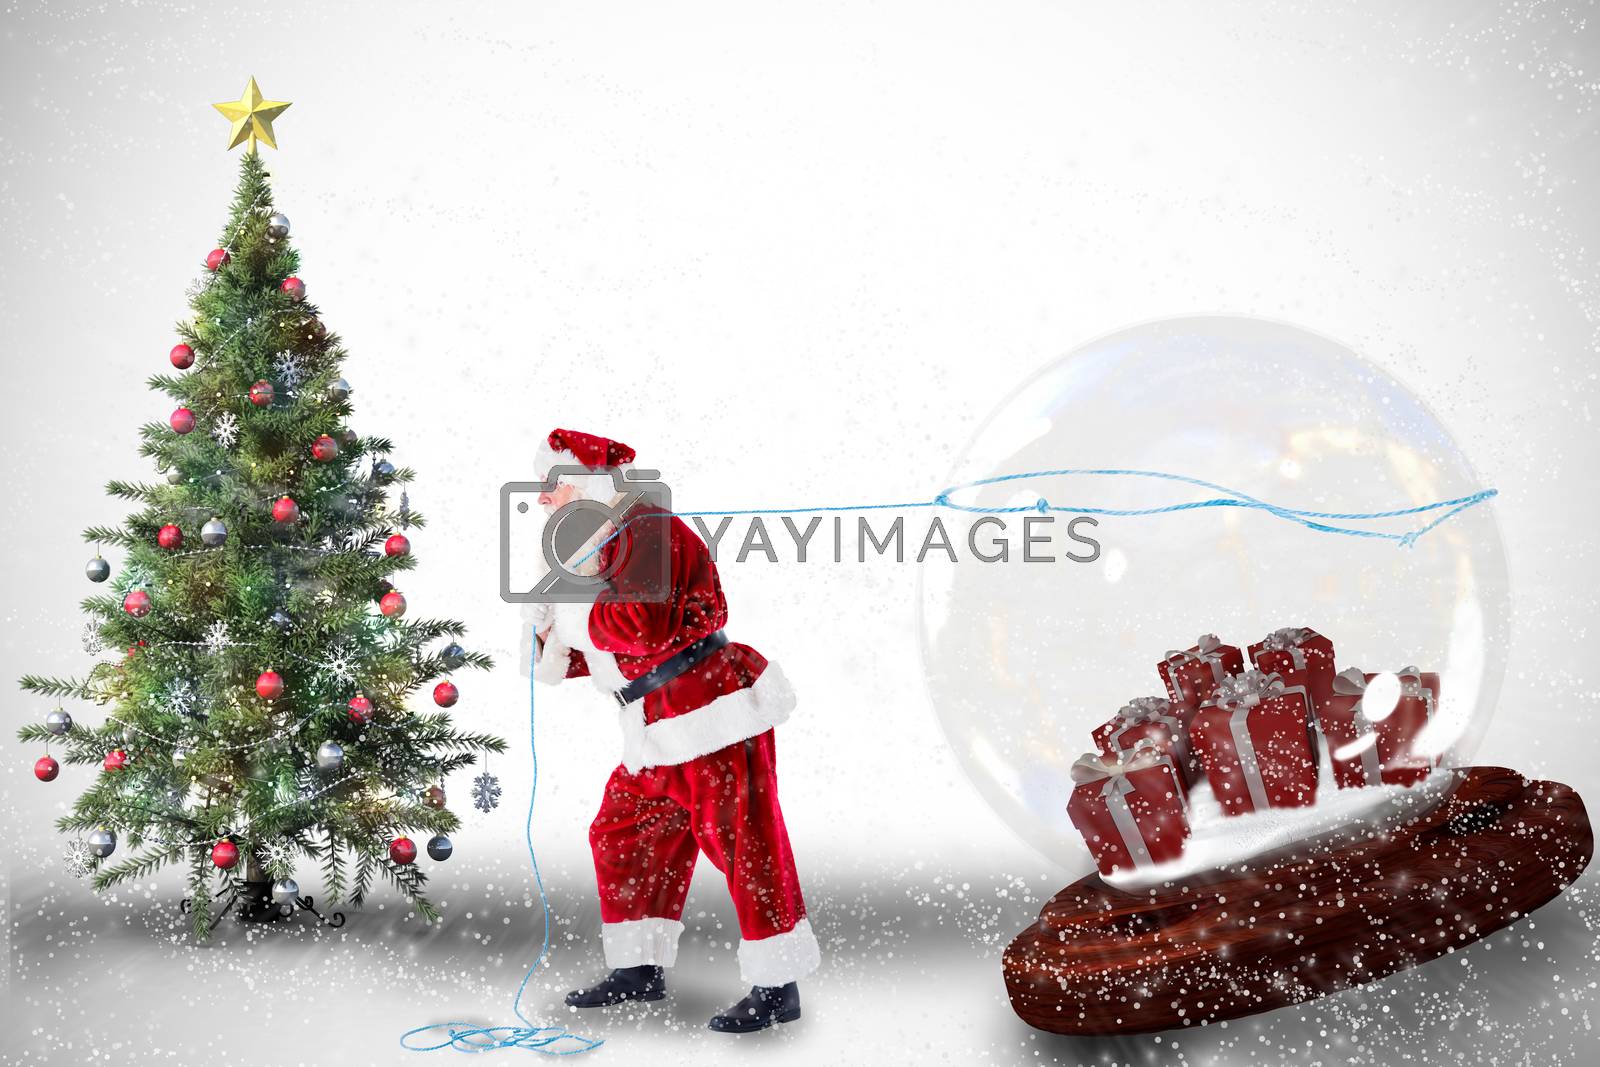 Royalty free image of Composite image of santa pulling snow globe of presents by Wavebreakmedia